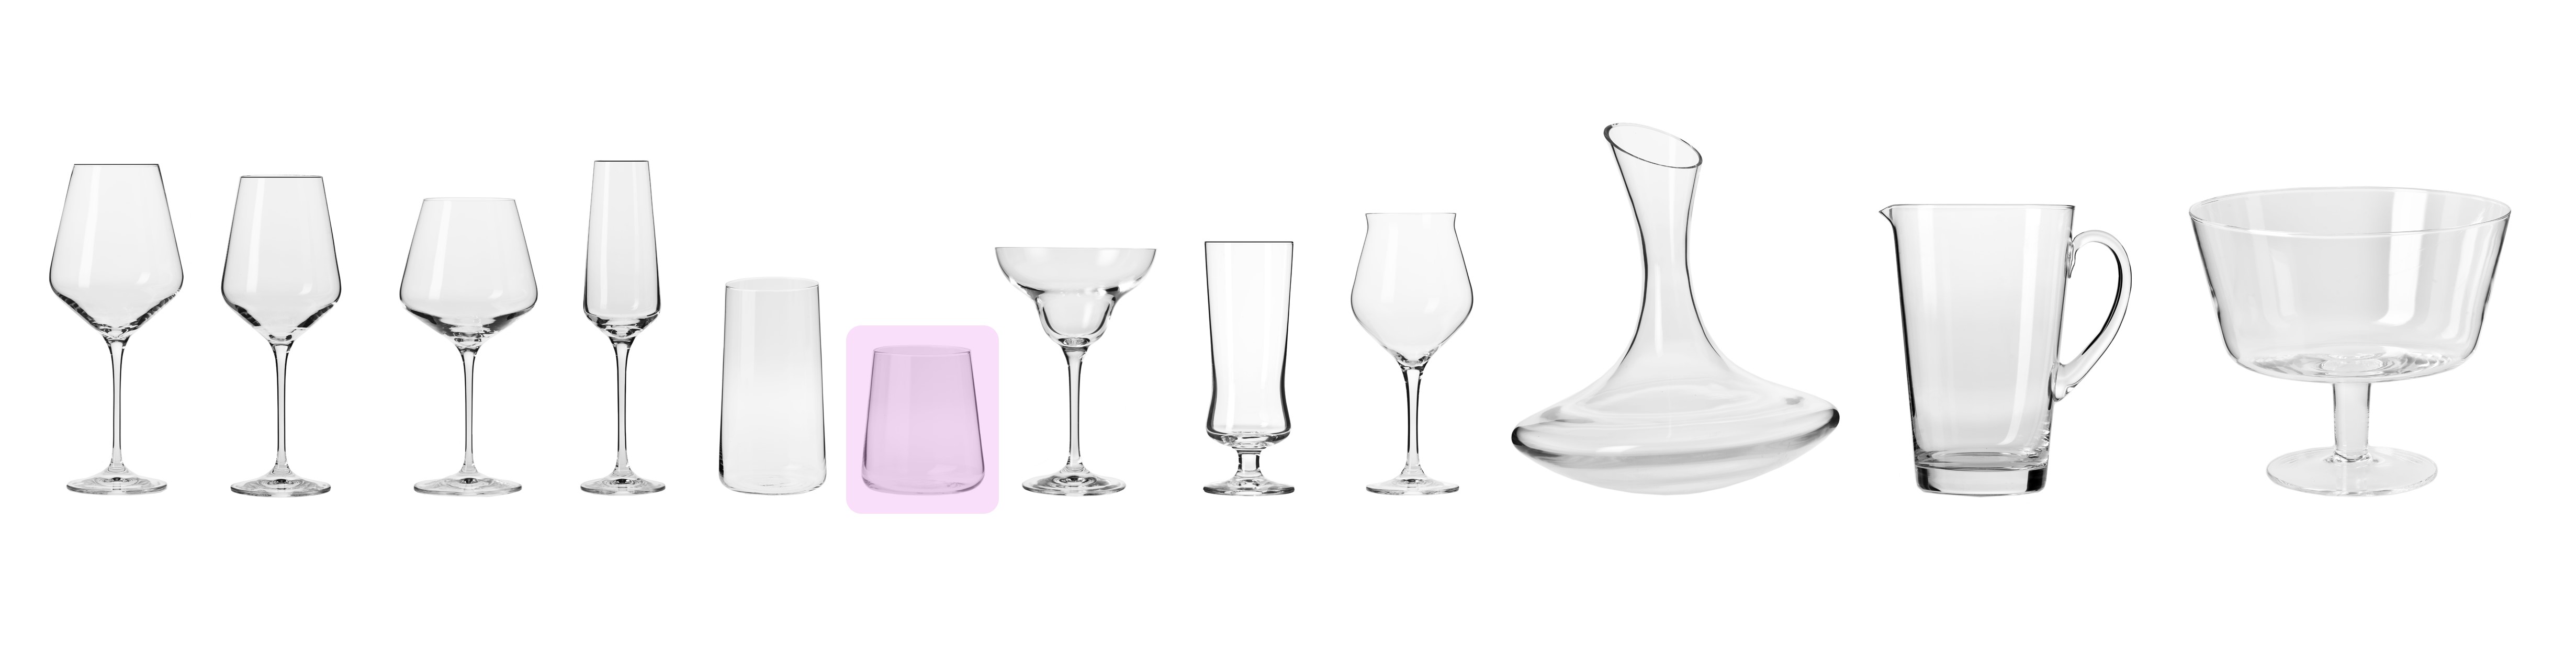 Water glass, tumbler - AVANT-GARDE collection